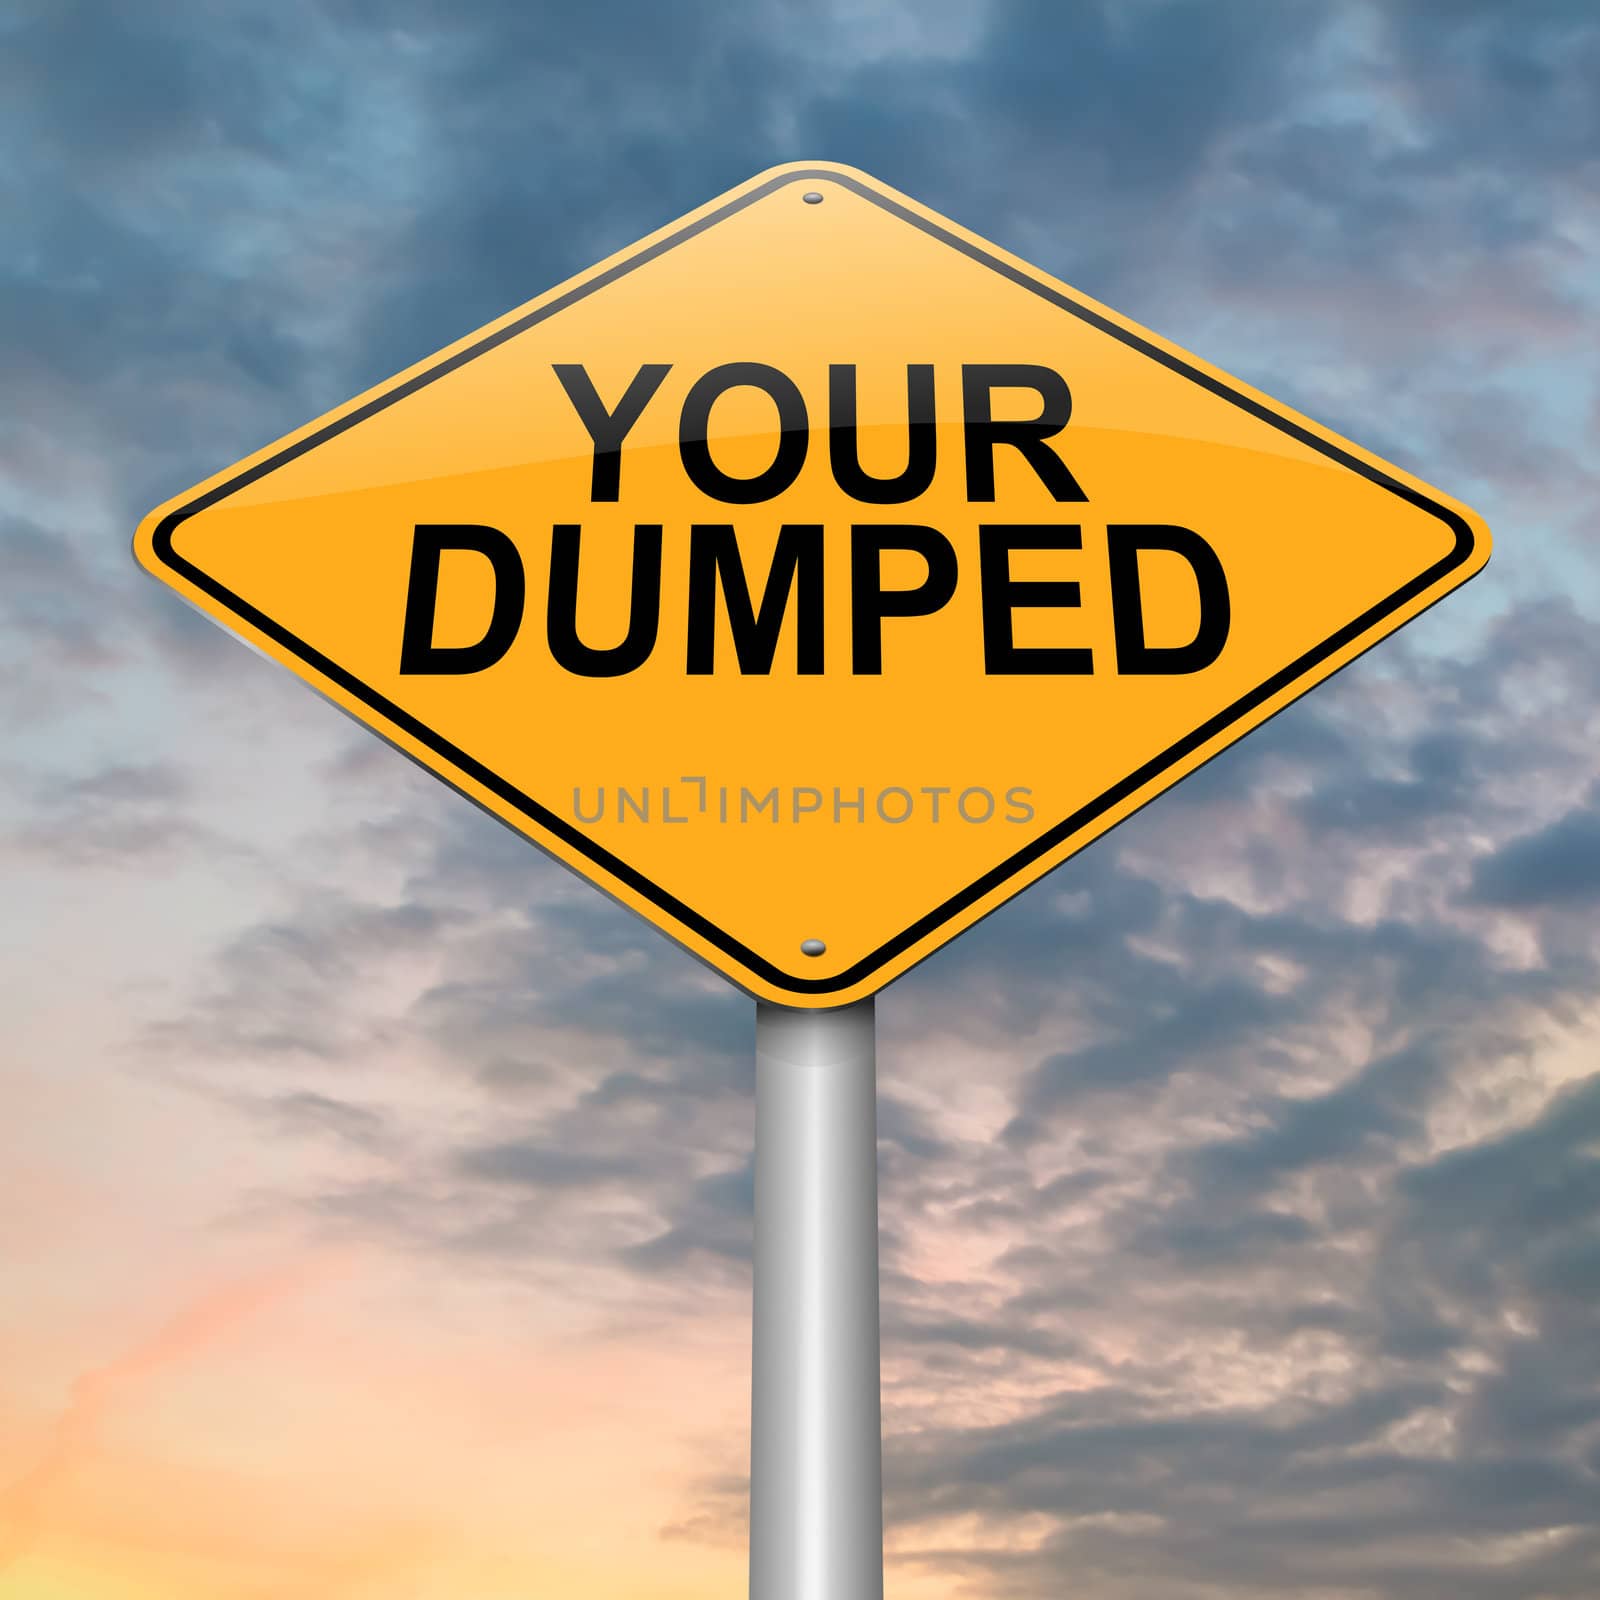 Your dumped. by 72soul